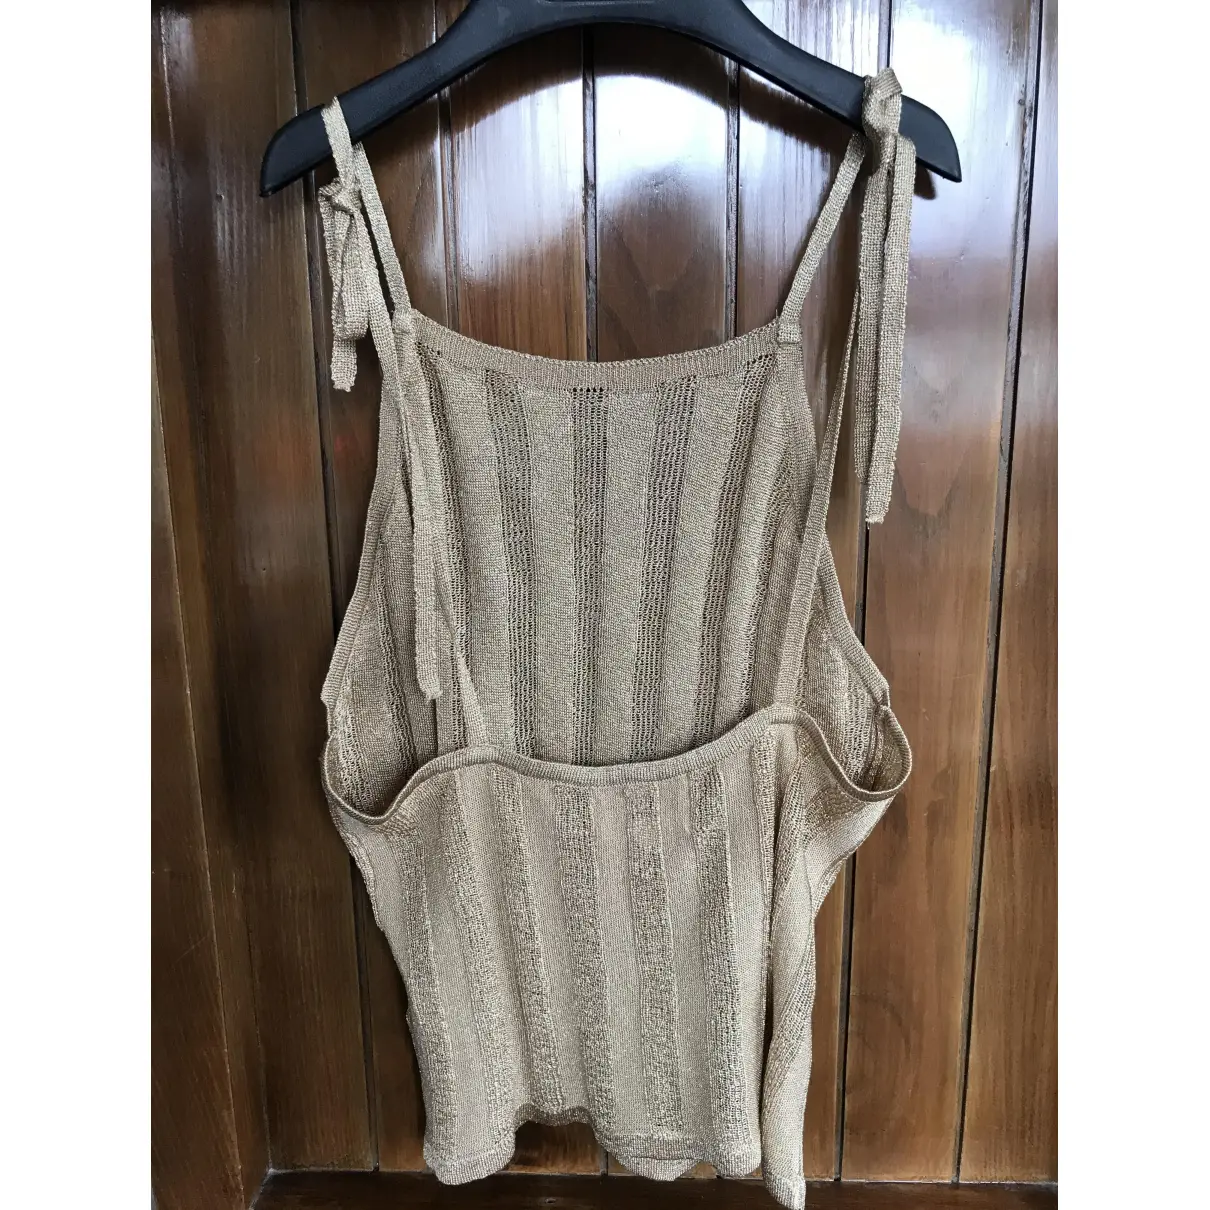 Buy Rouje Camisole online